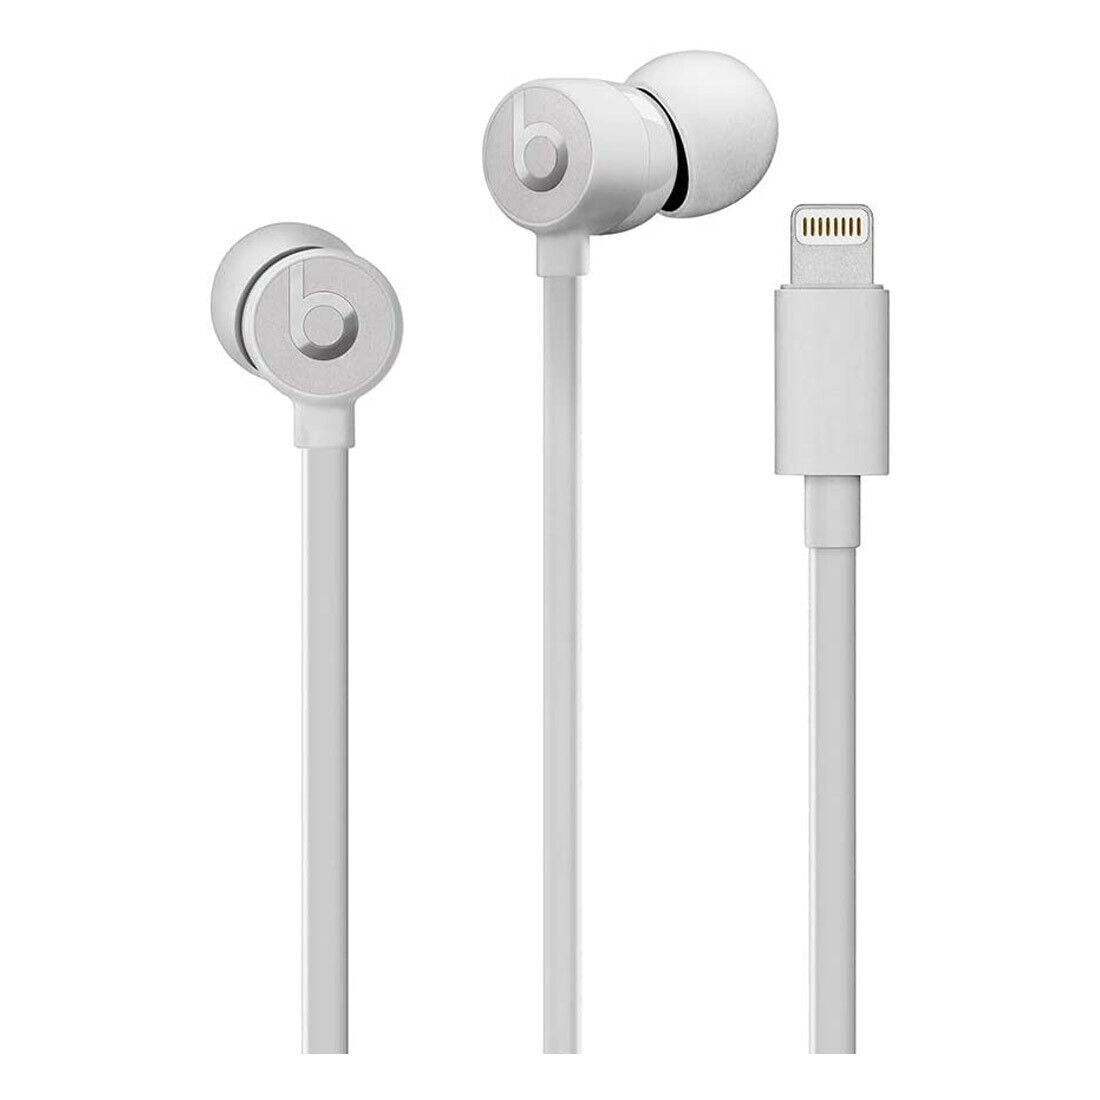 UrBeats3 In-Ear Headphones with Plug For Apple (Refurbished)